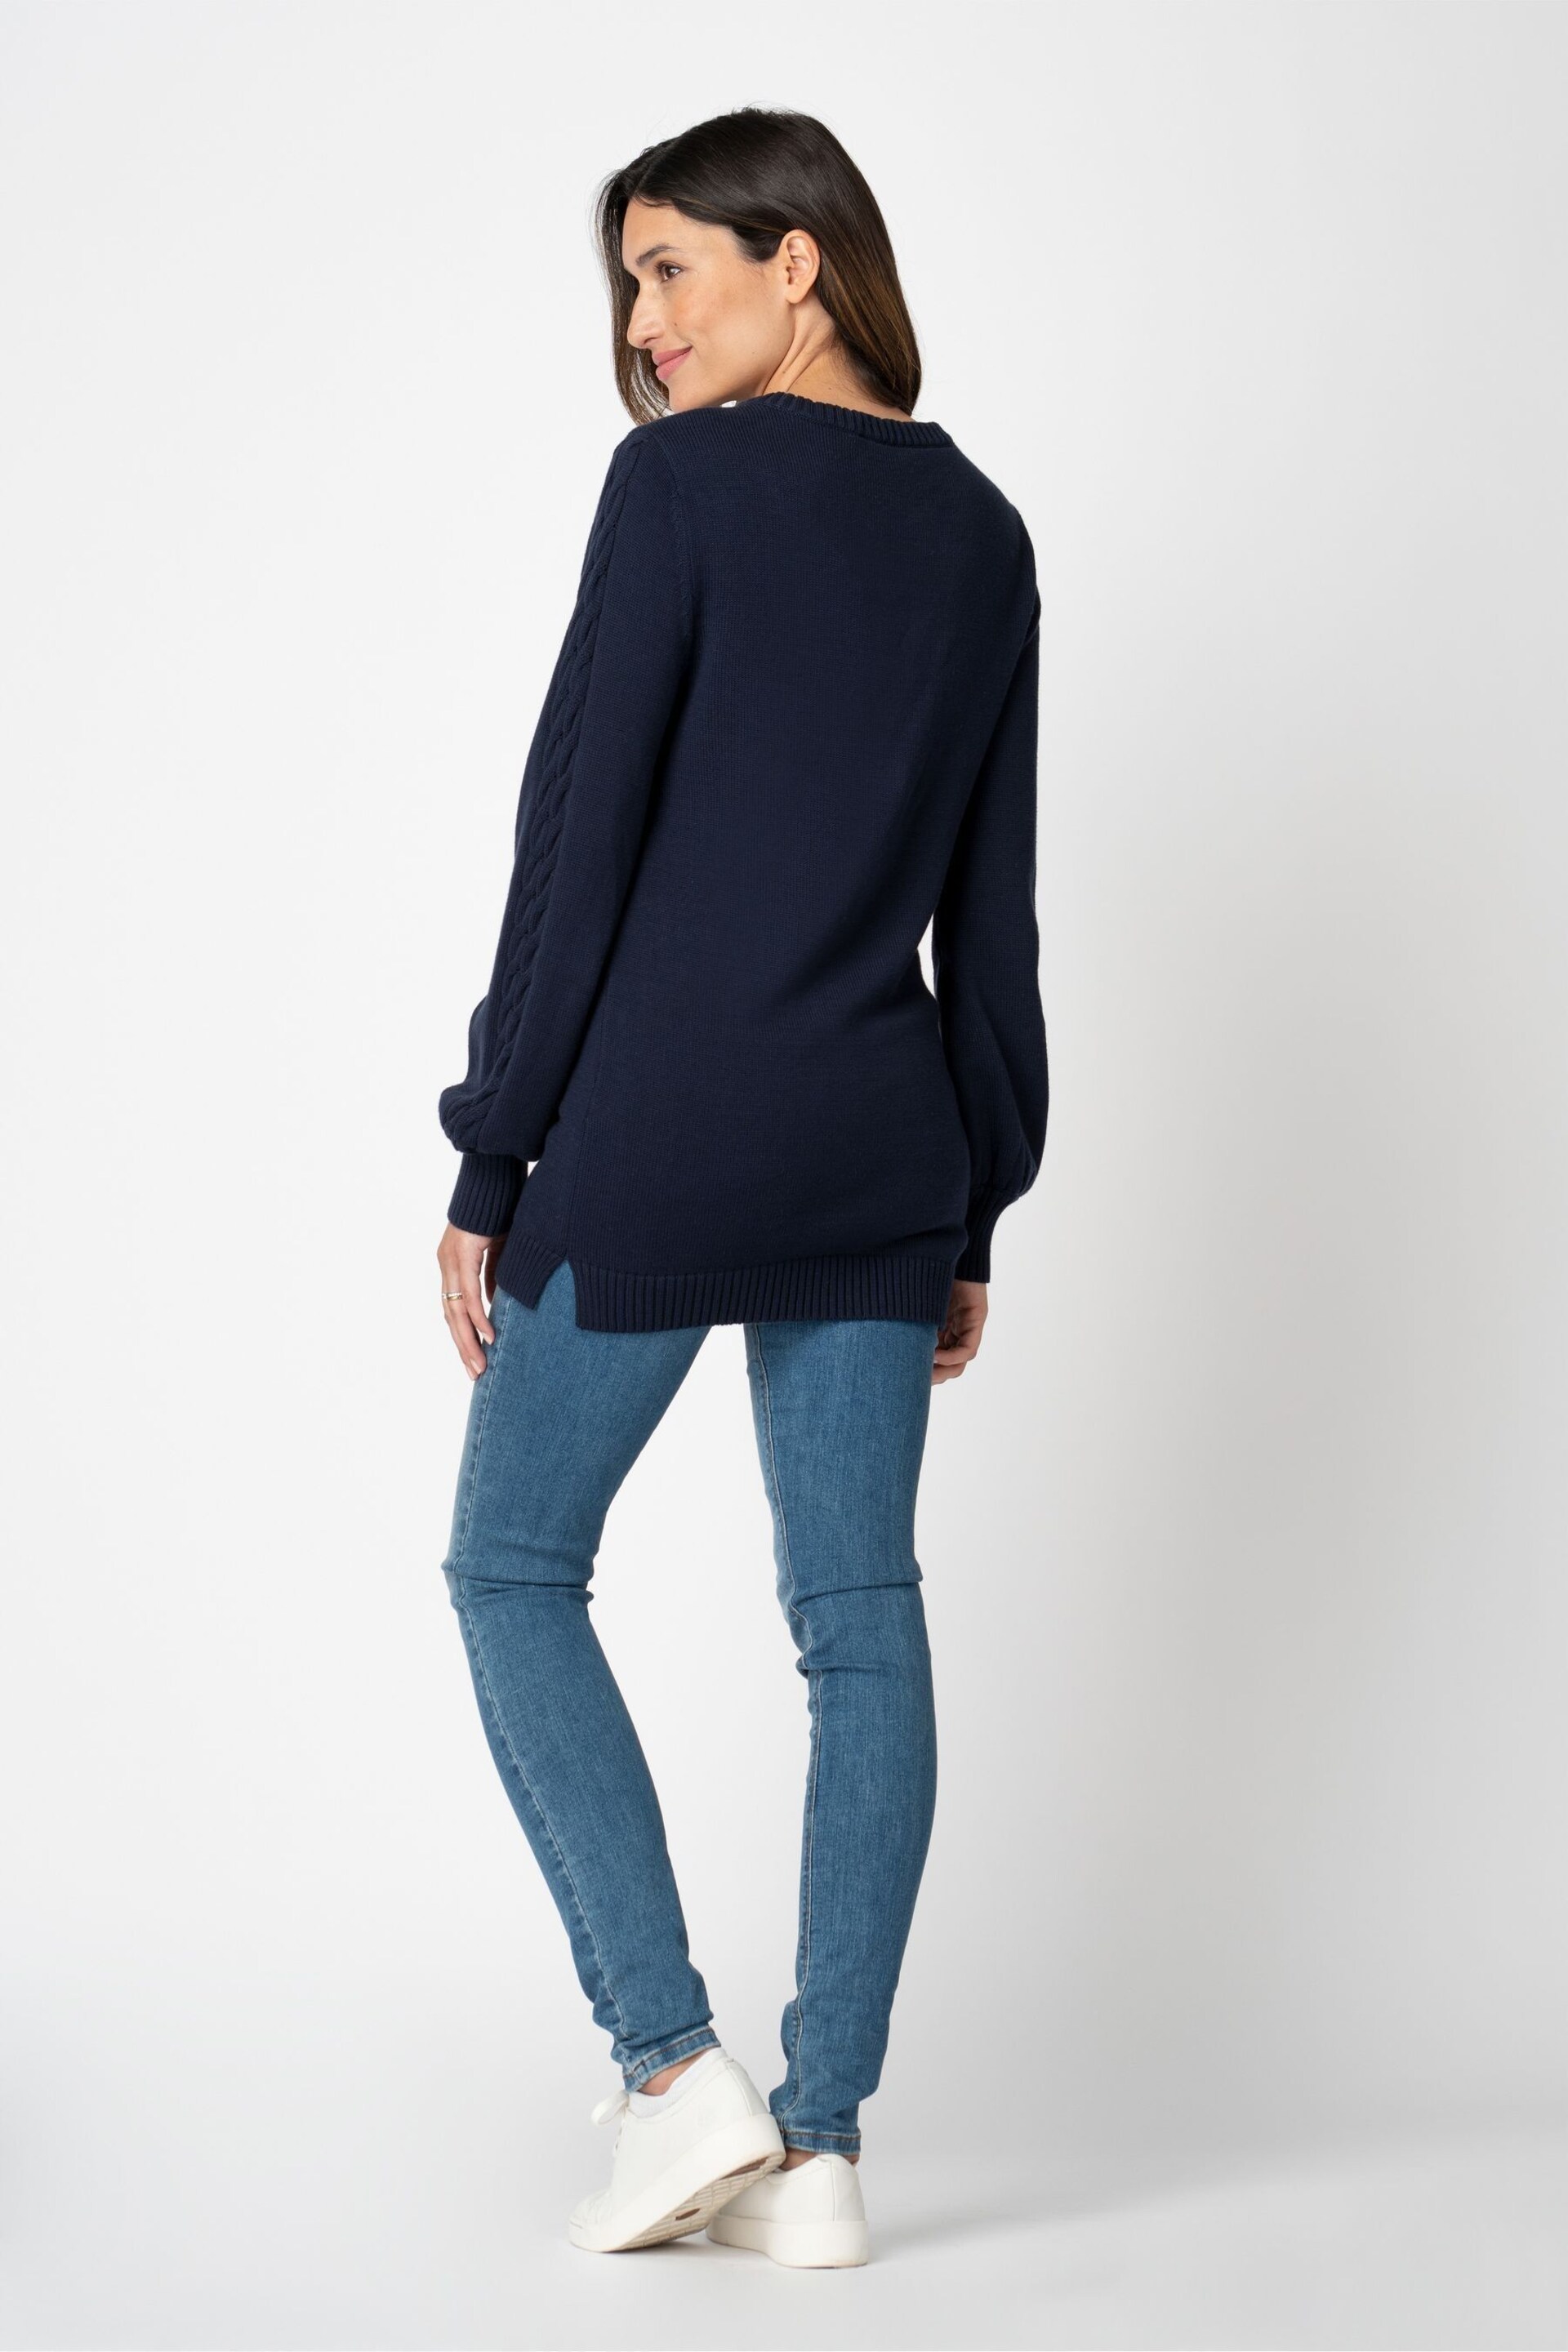 Seraphine Blue Bell Sleeve Cable Detail Nursing Jumper - Image 2 of 4